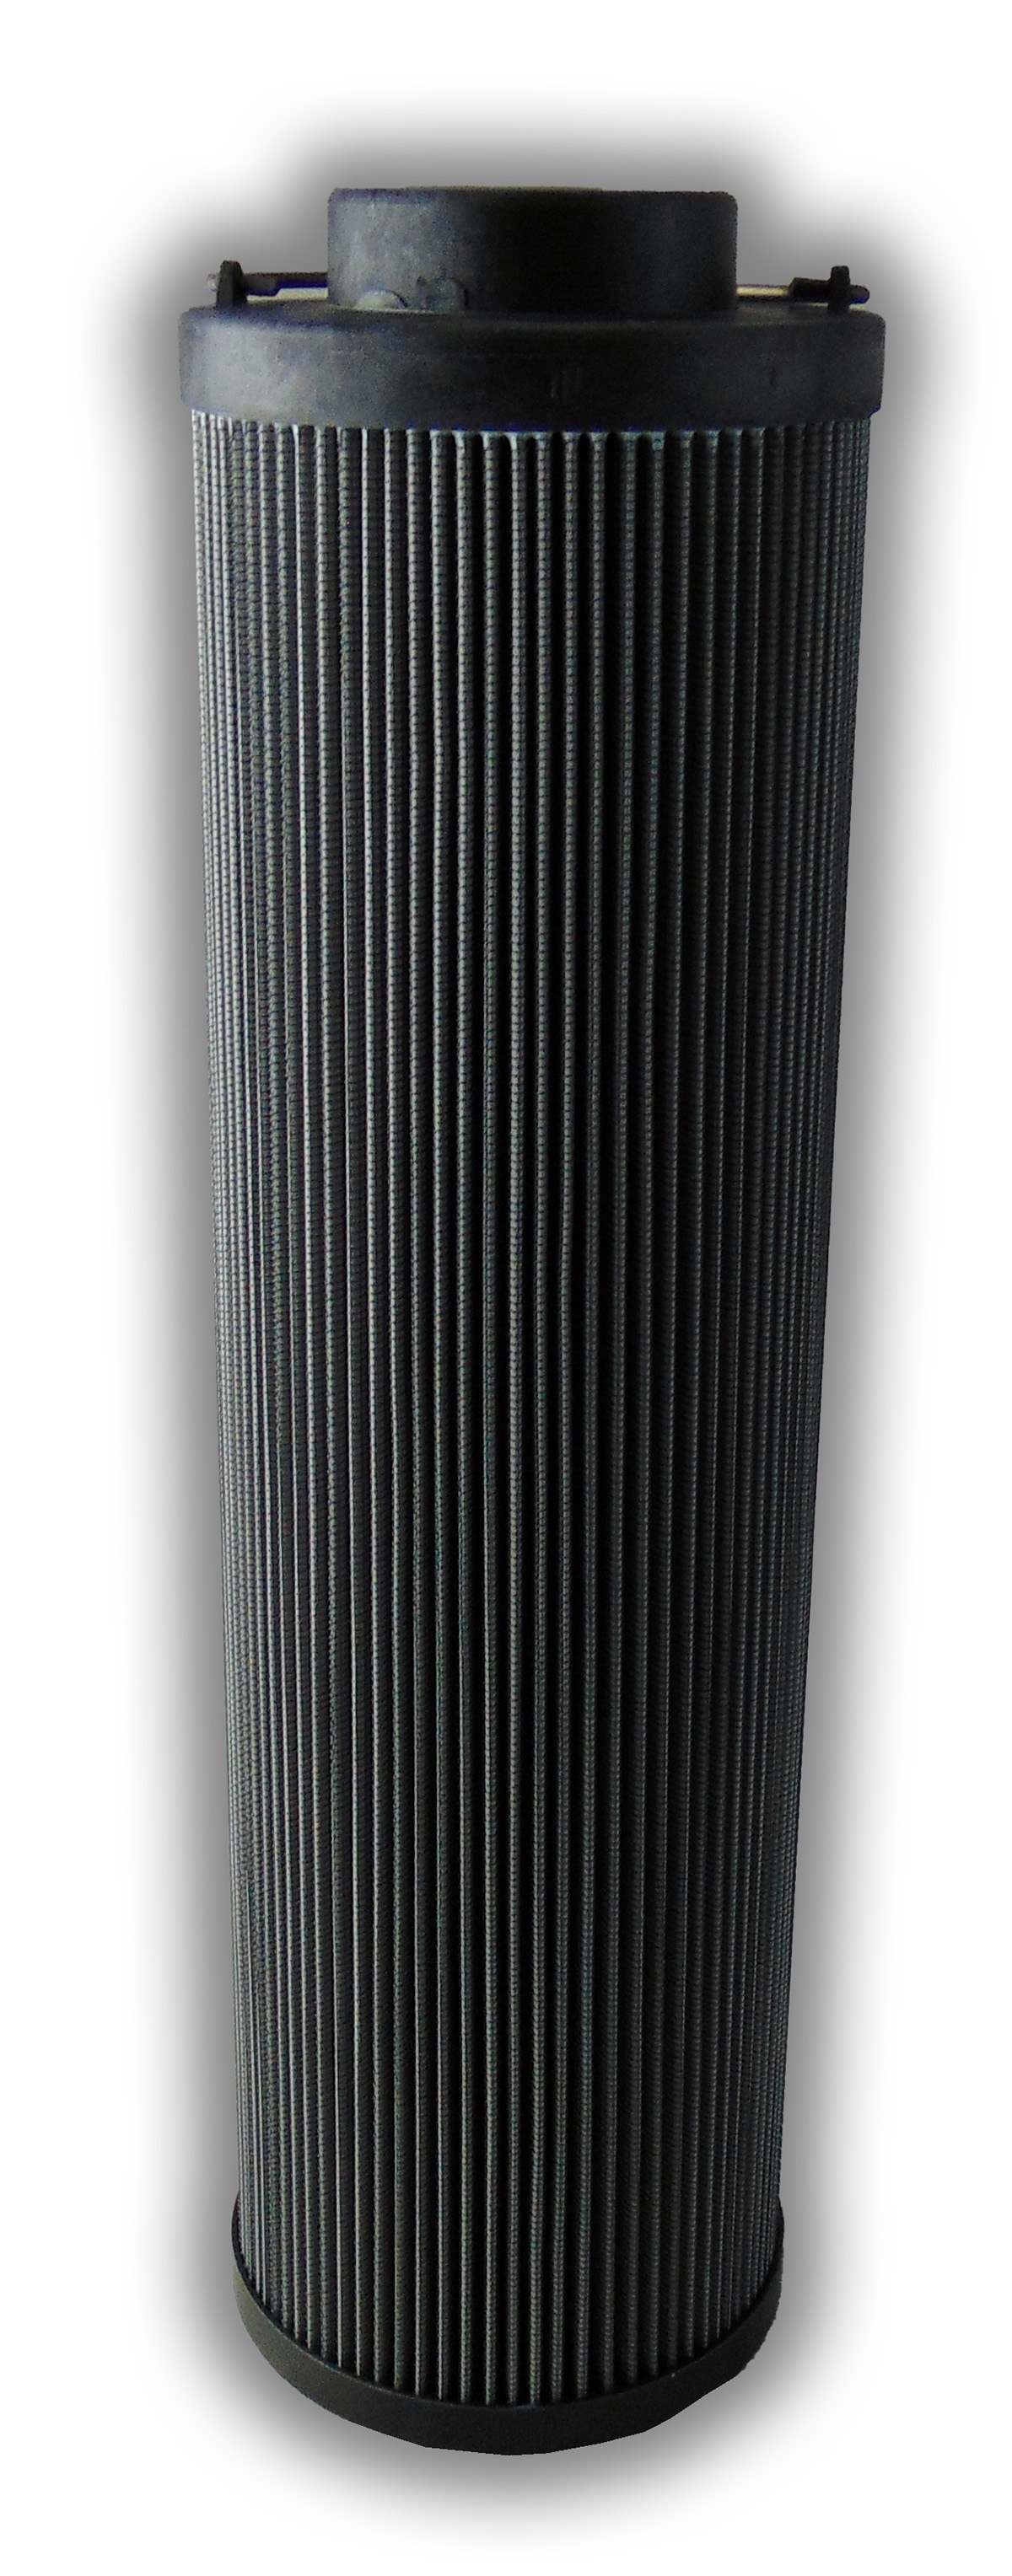 Hydraulic Filter, Wire Mesh, 100 Micron Rating, Viton Seal, 16.22 Inch Height